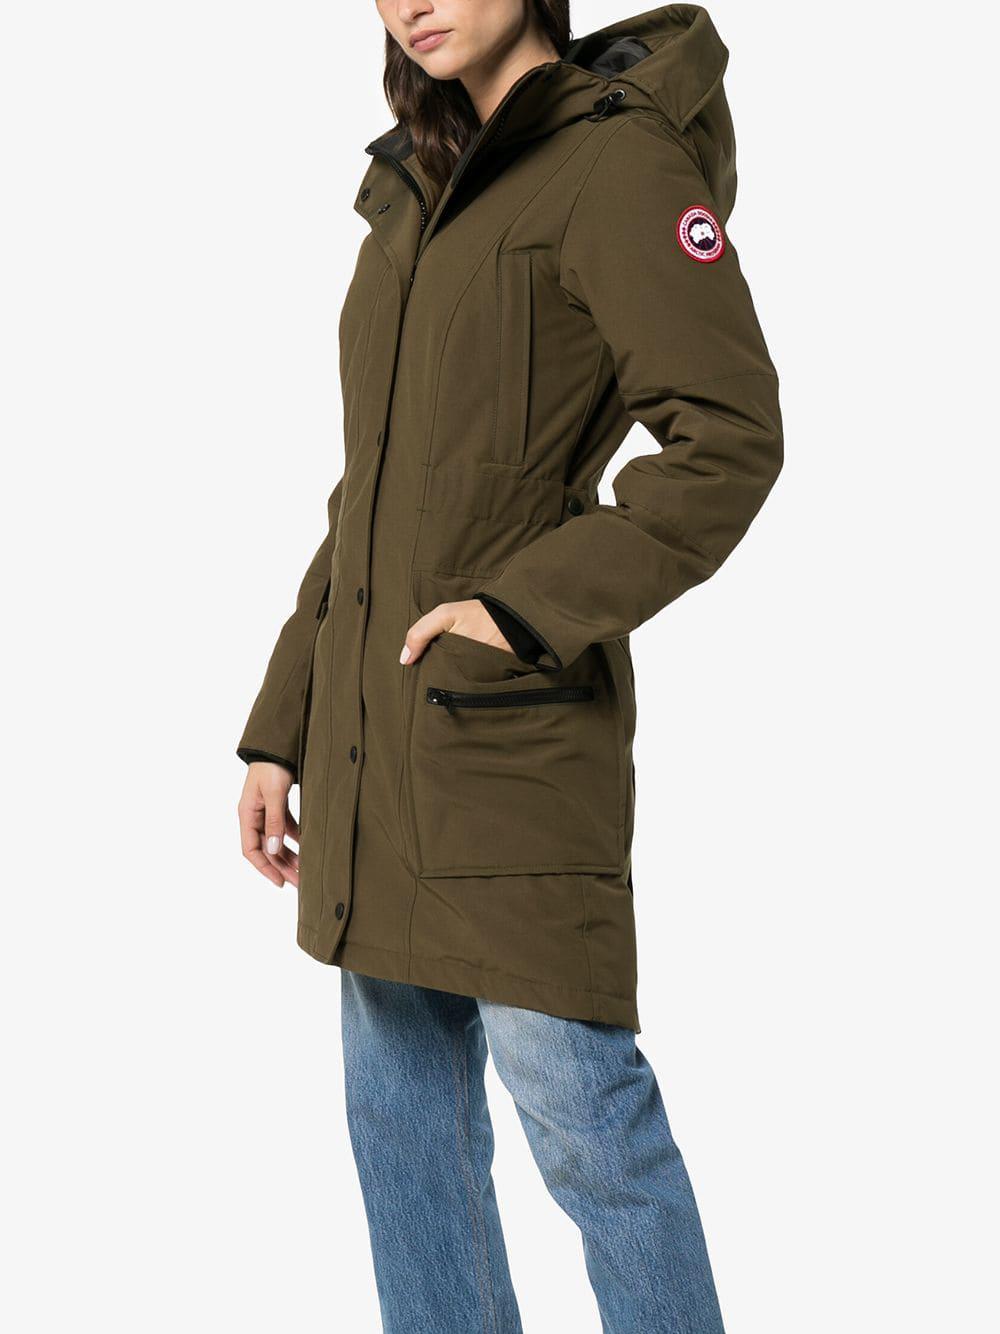 Canada Goose Arctic Kinley Hooded Parka Jacket in Green - Lyst